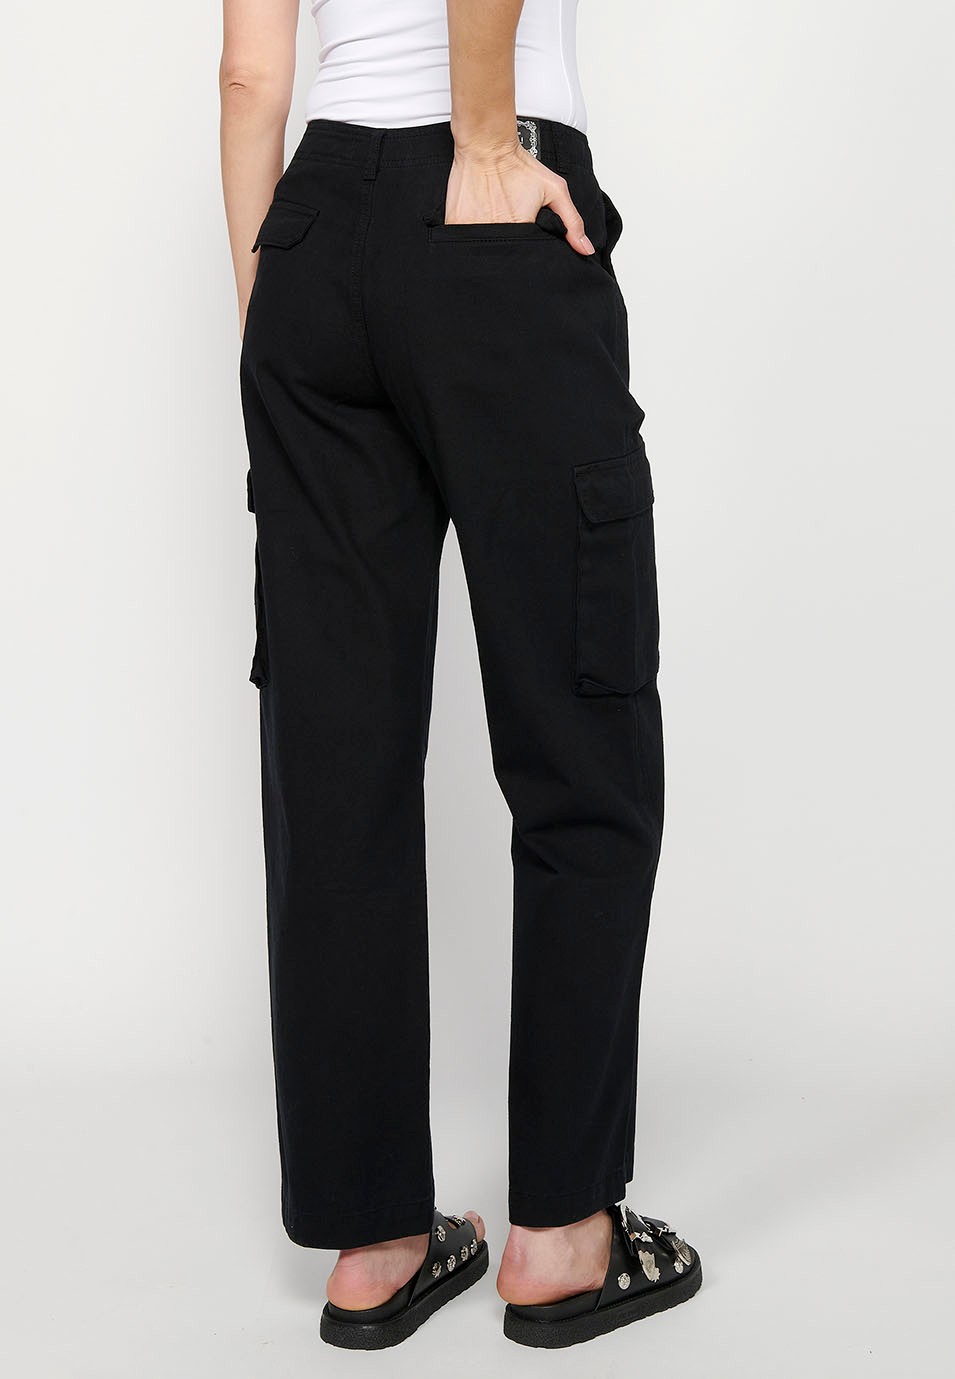 Long cotton cargo pants with pockets, black color for women